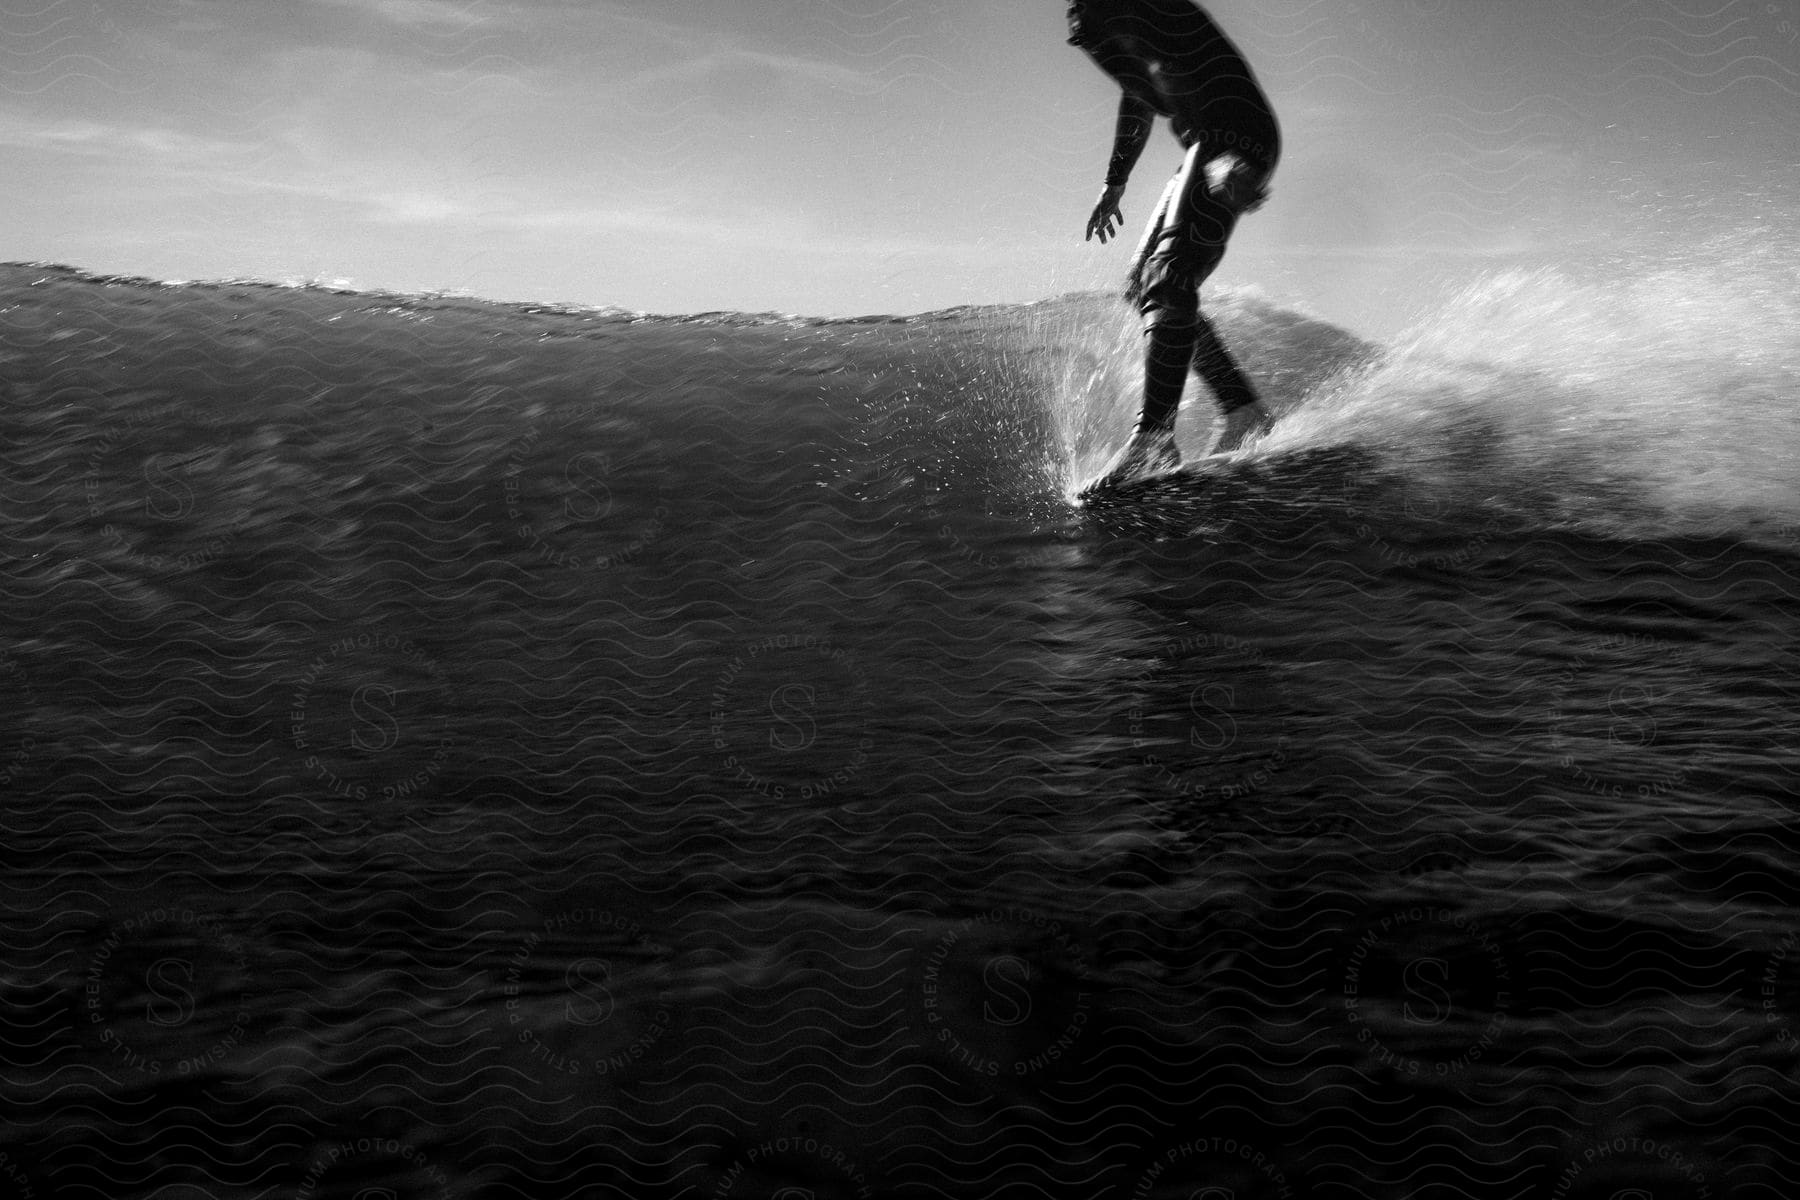 Legs of a person on the corner of the board surfing a wave